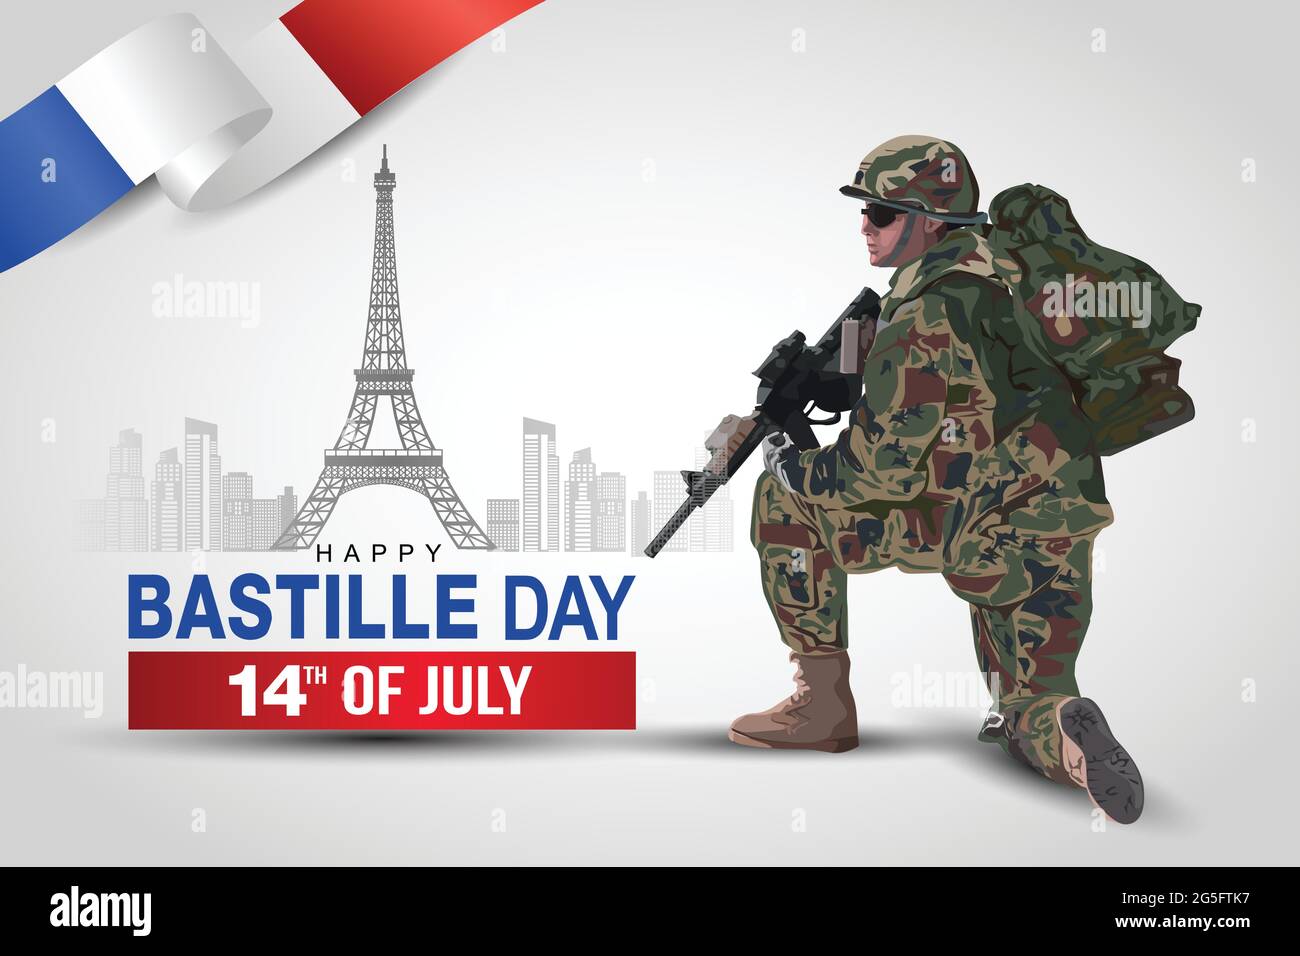 illustration of 14th of July background for Happy bastille day. a soldier with gun and flag. Vector illustration design. Stock Vector